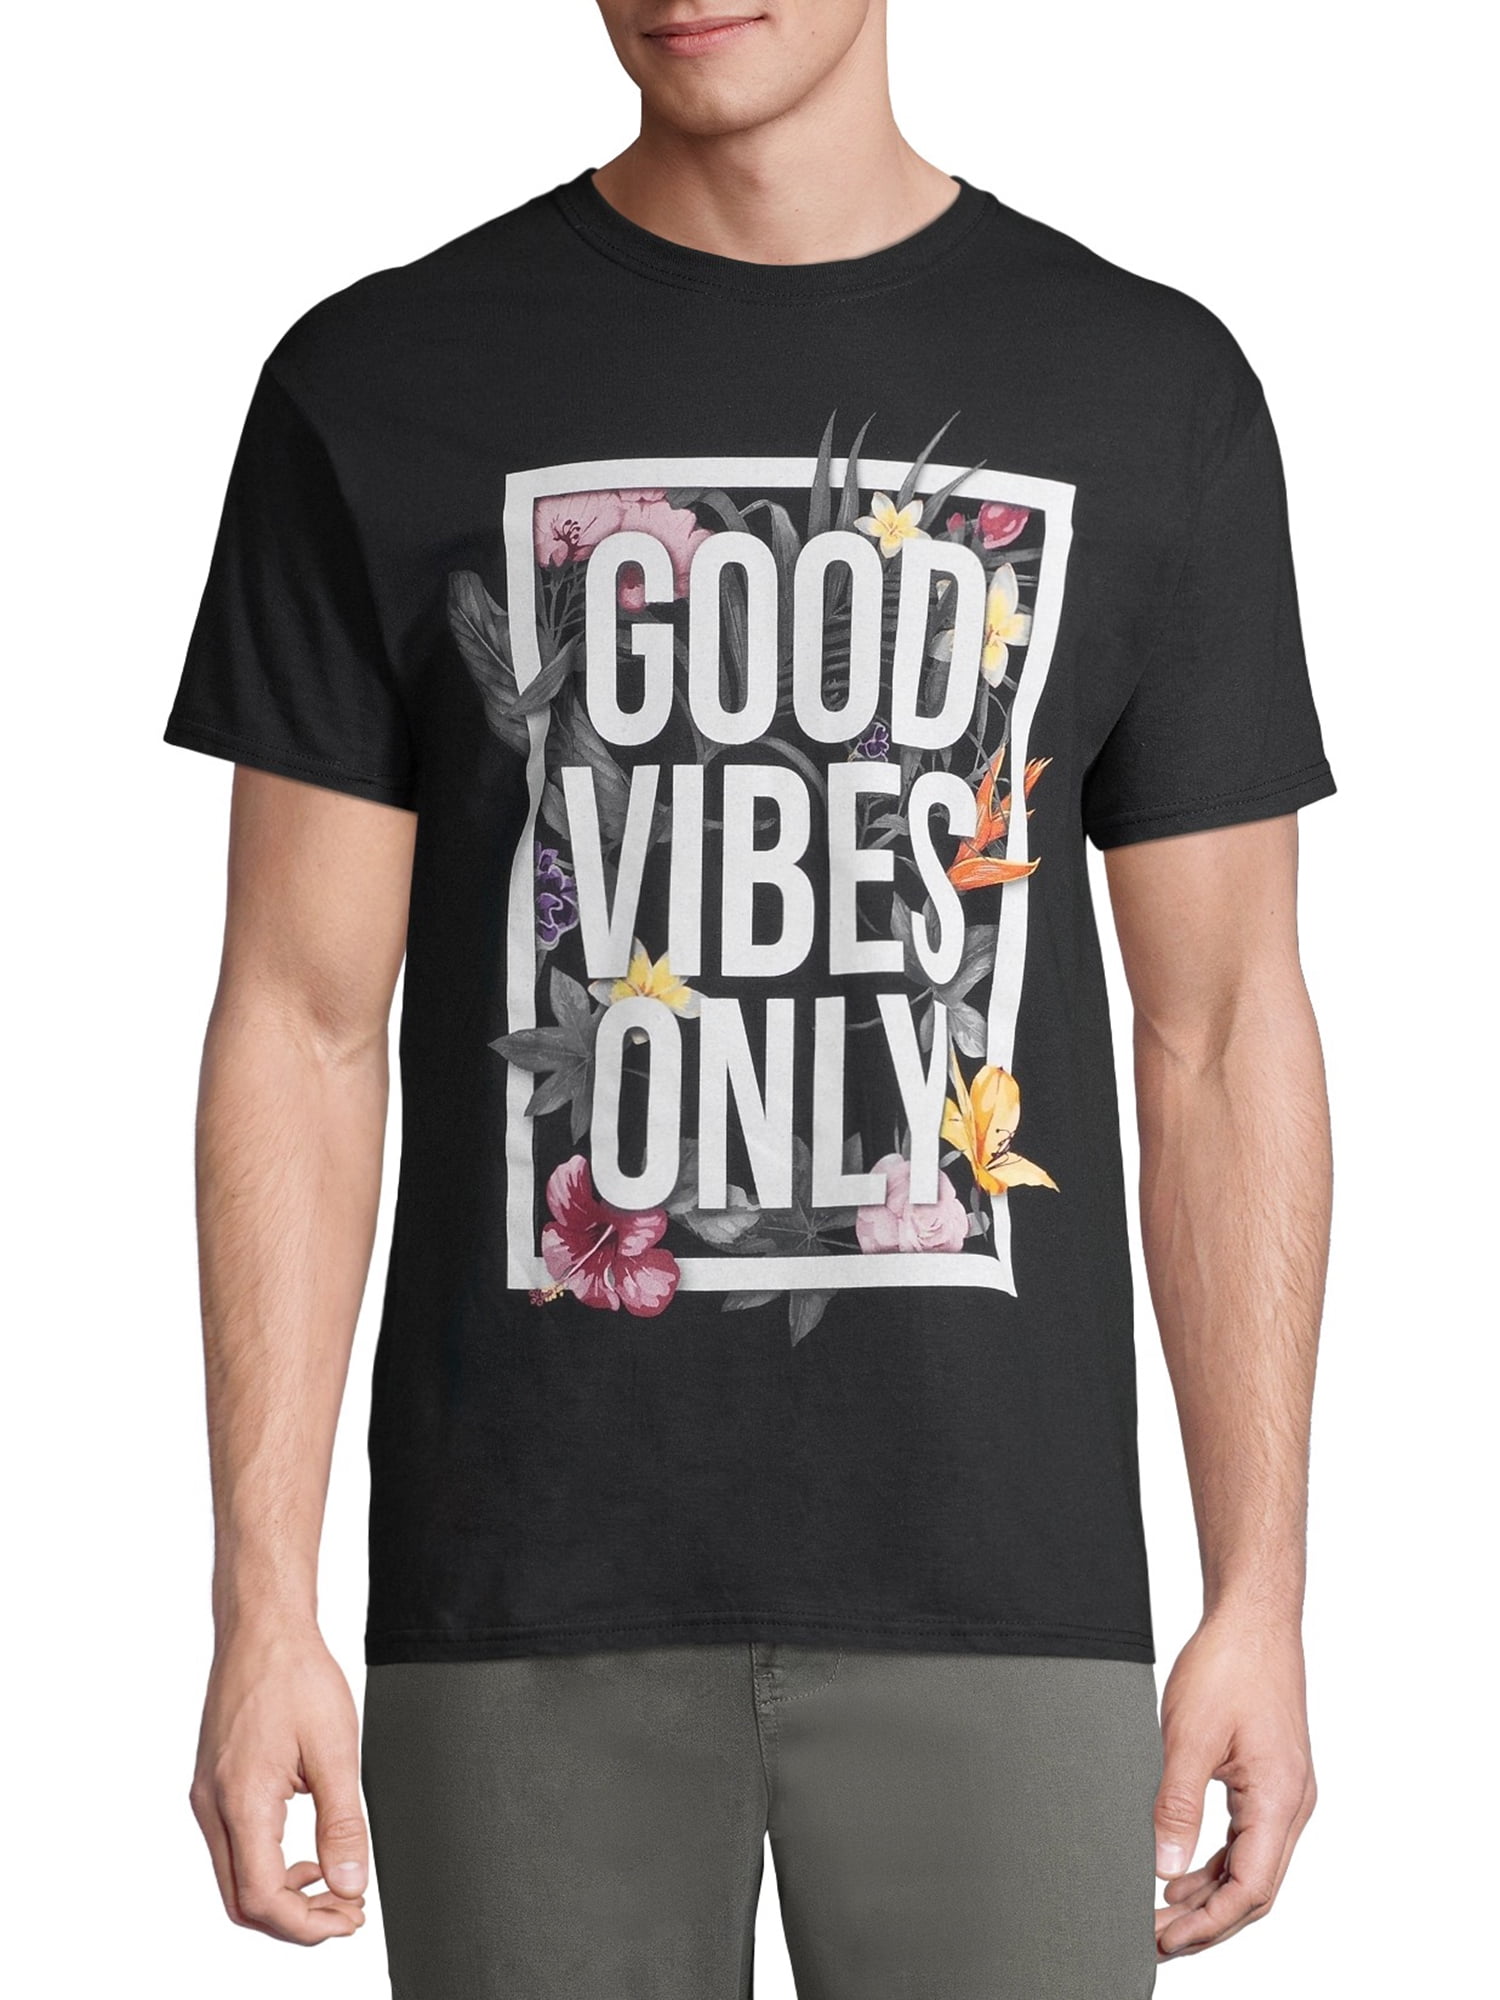 Graphic Tee Other Vibes Okay Good Vibes T-Shirt Men's T-Shirt Funny T-Shirt Women's T-Shirt Good Vibes Shirt Fun Shirt